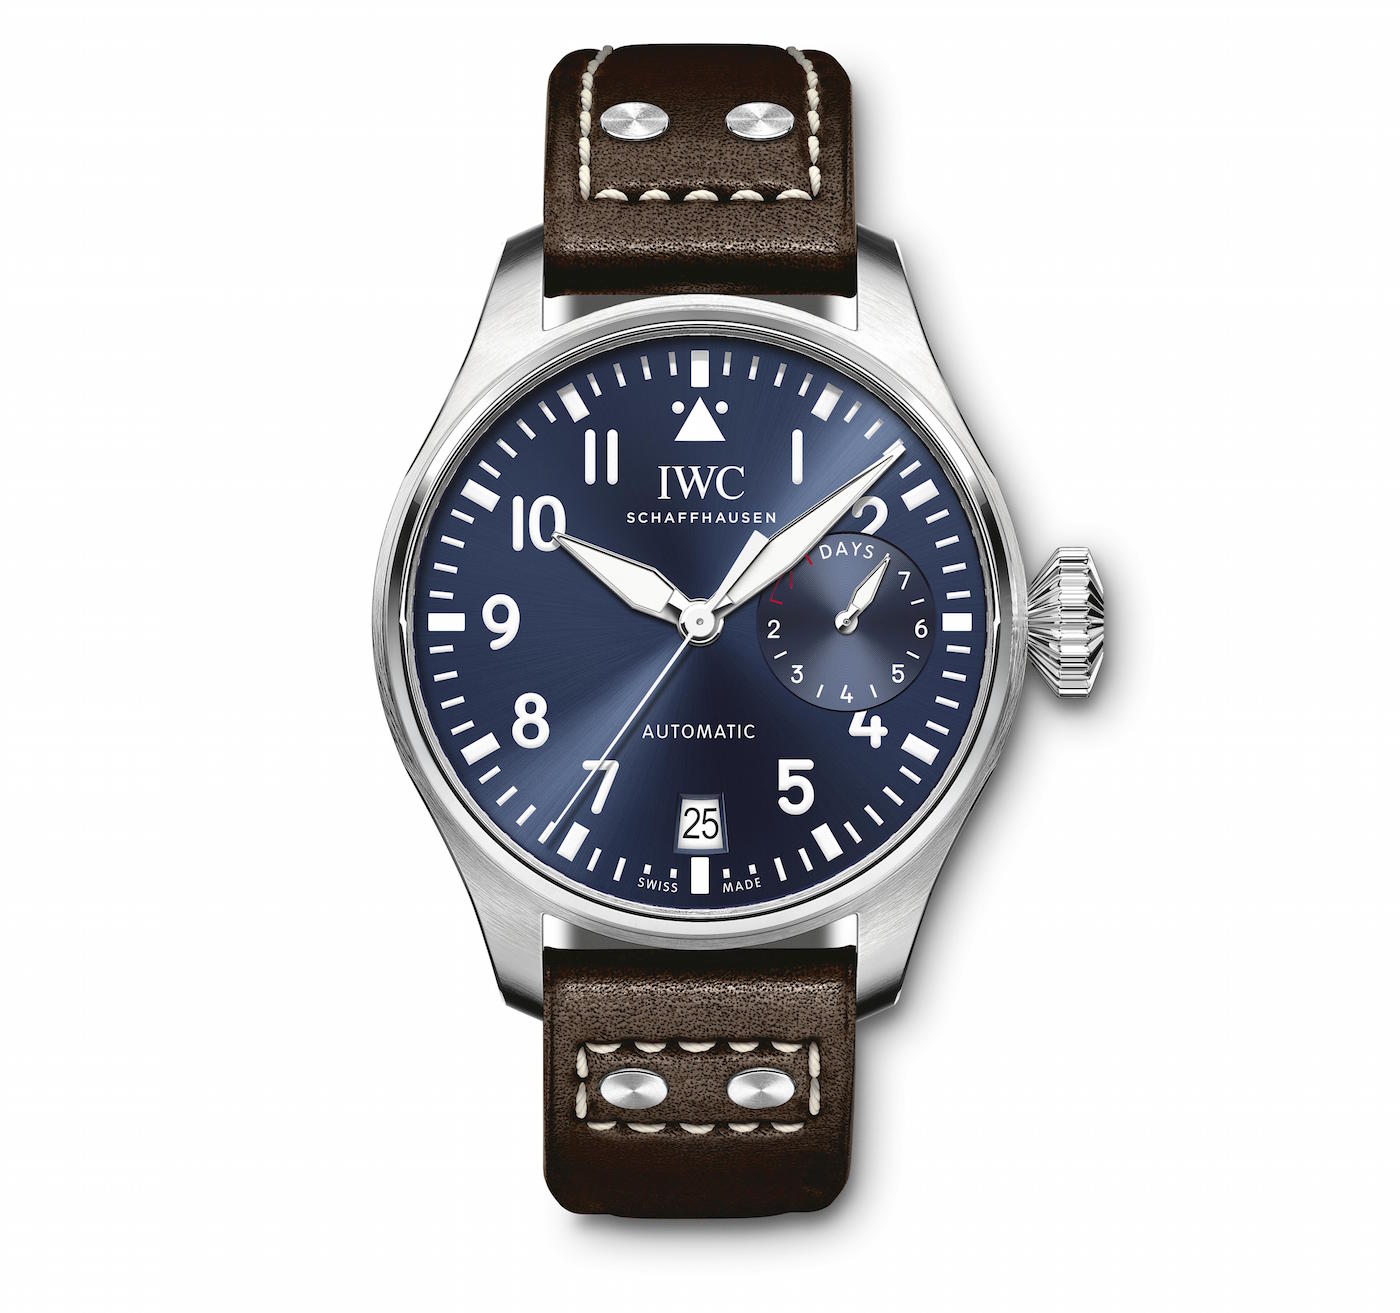 IW501002 Big Pilot&#039;s Watch Edition &quot;Le Petit Prince&quot; in stainless steel with Brown calfskin strap Front Mechanical movement · Pellaton automatic winding · IWC-manufactured 52110 calibre (5200